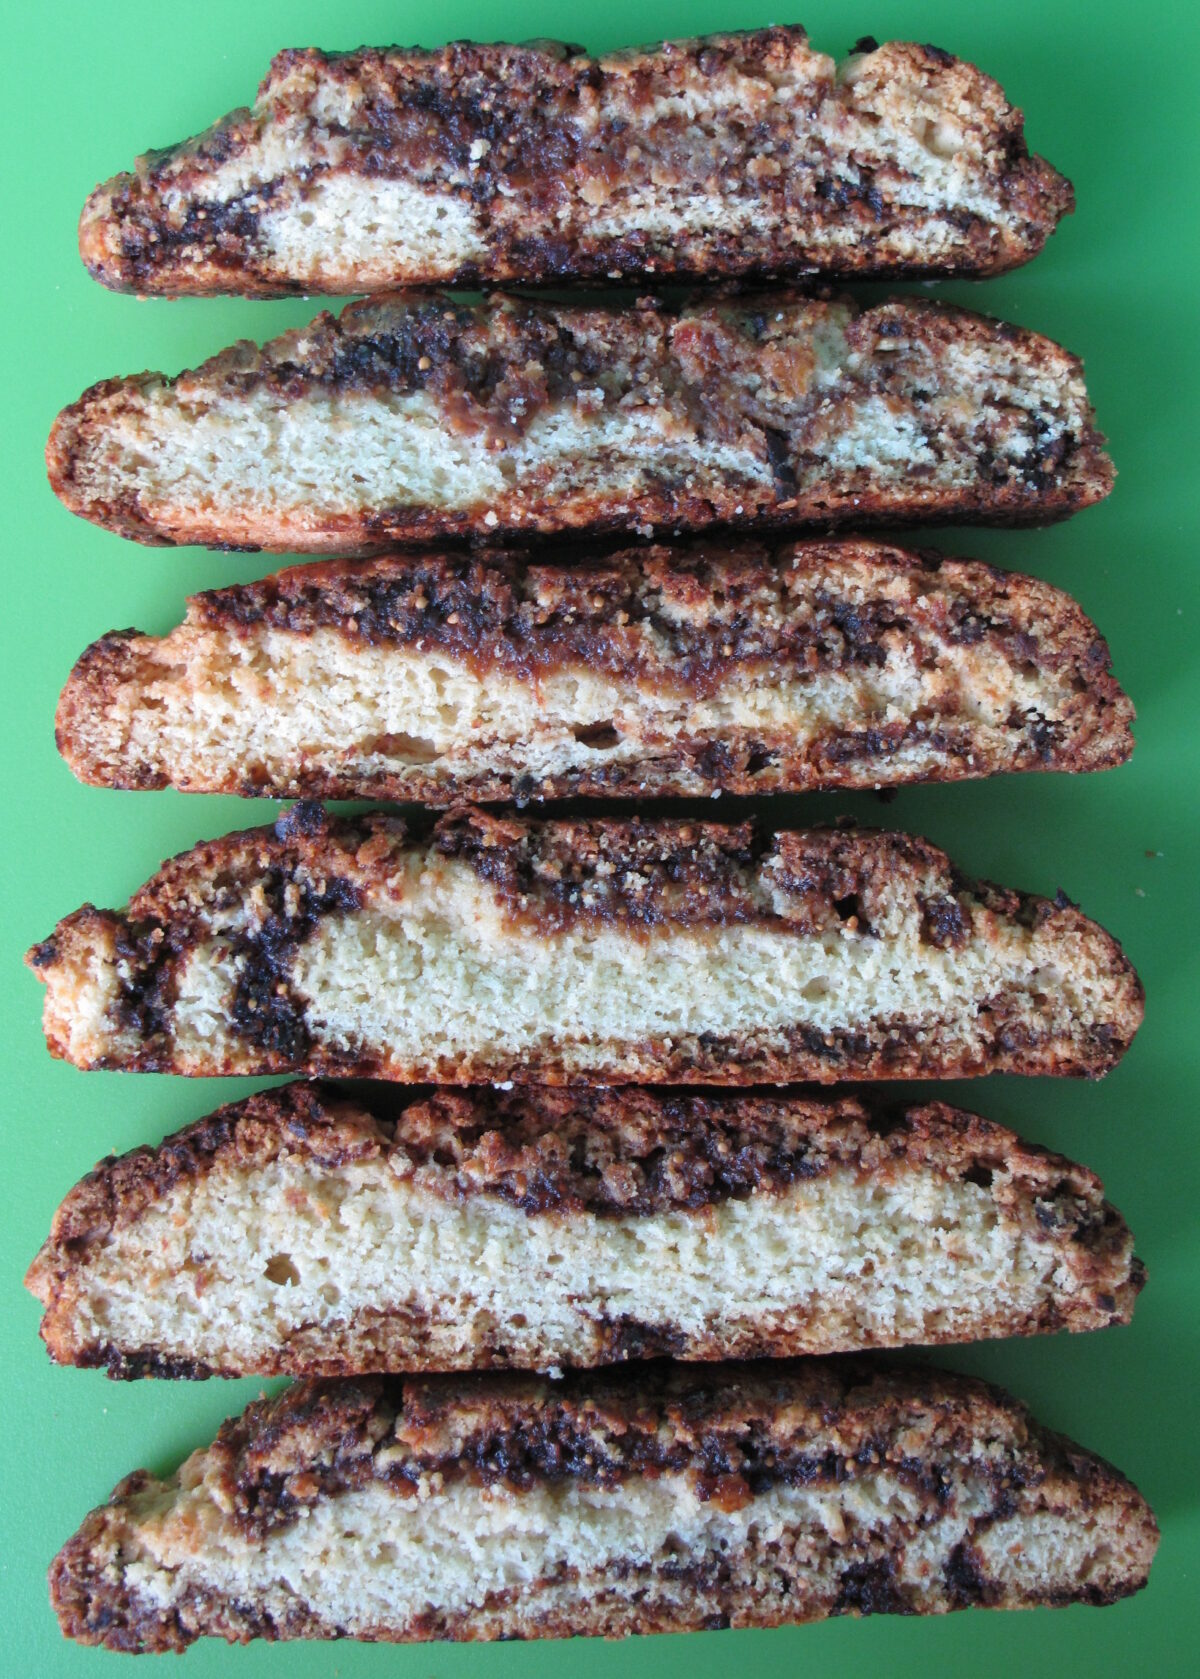 Biscotti lying on their cut edge to show the ribbons of jam inside.